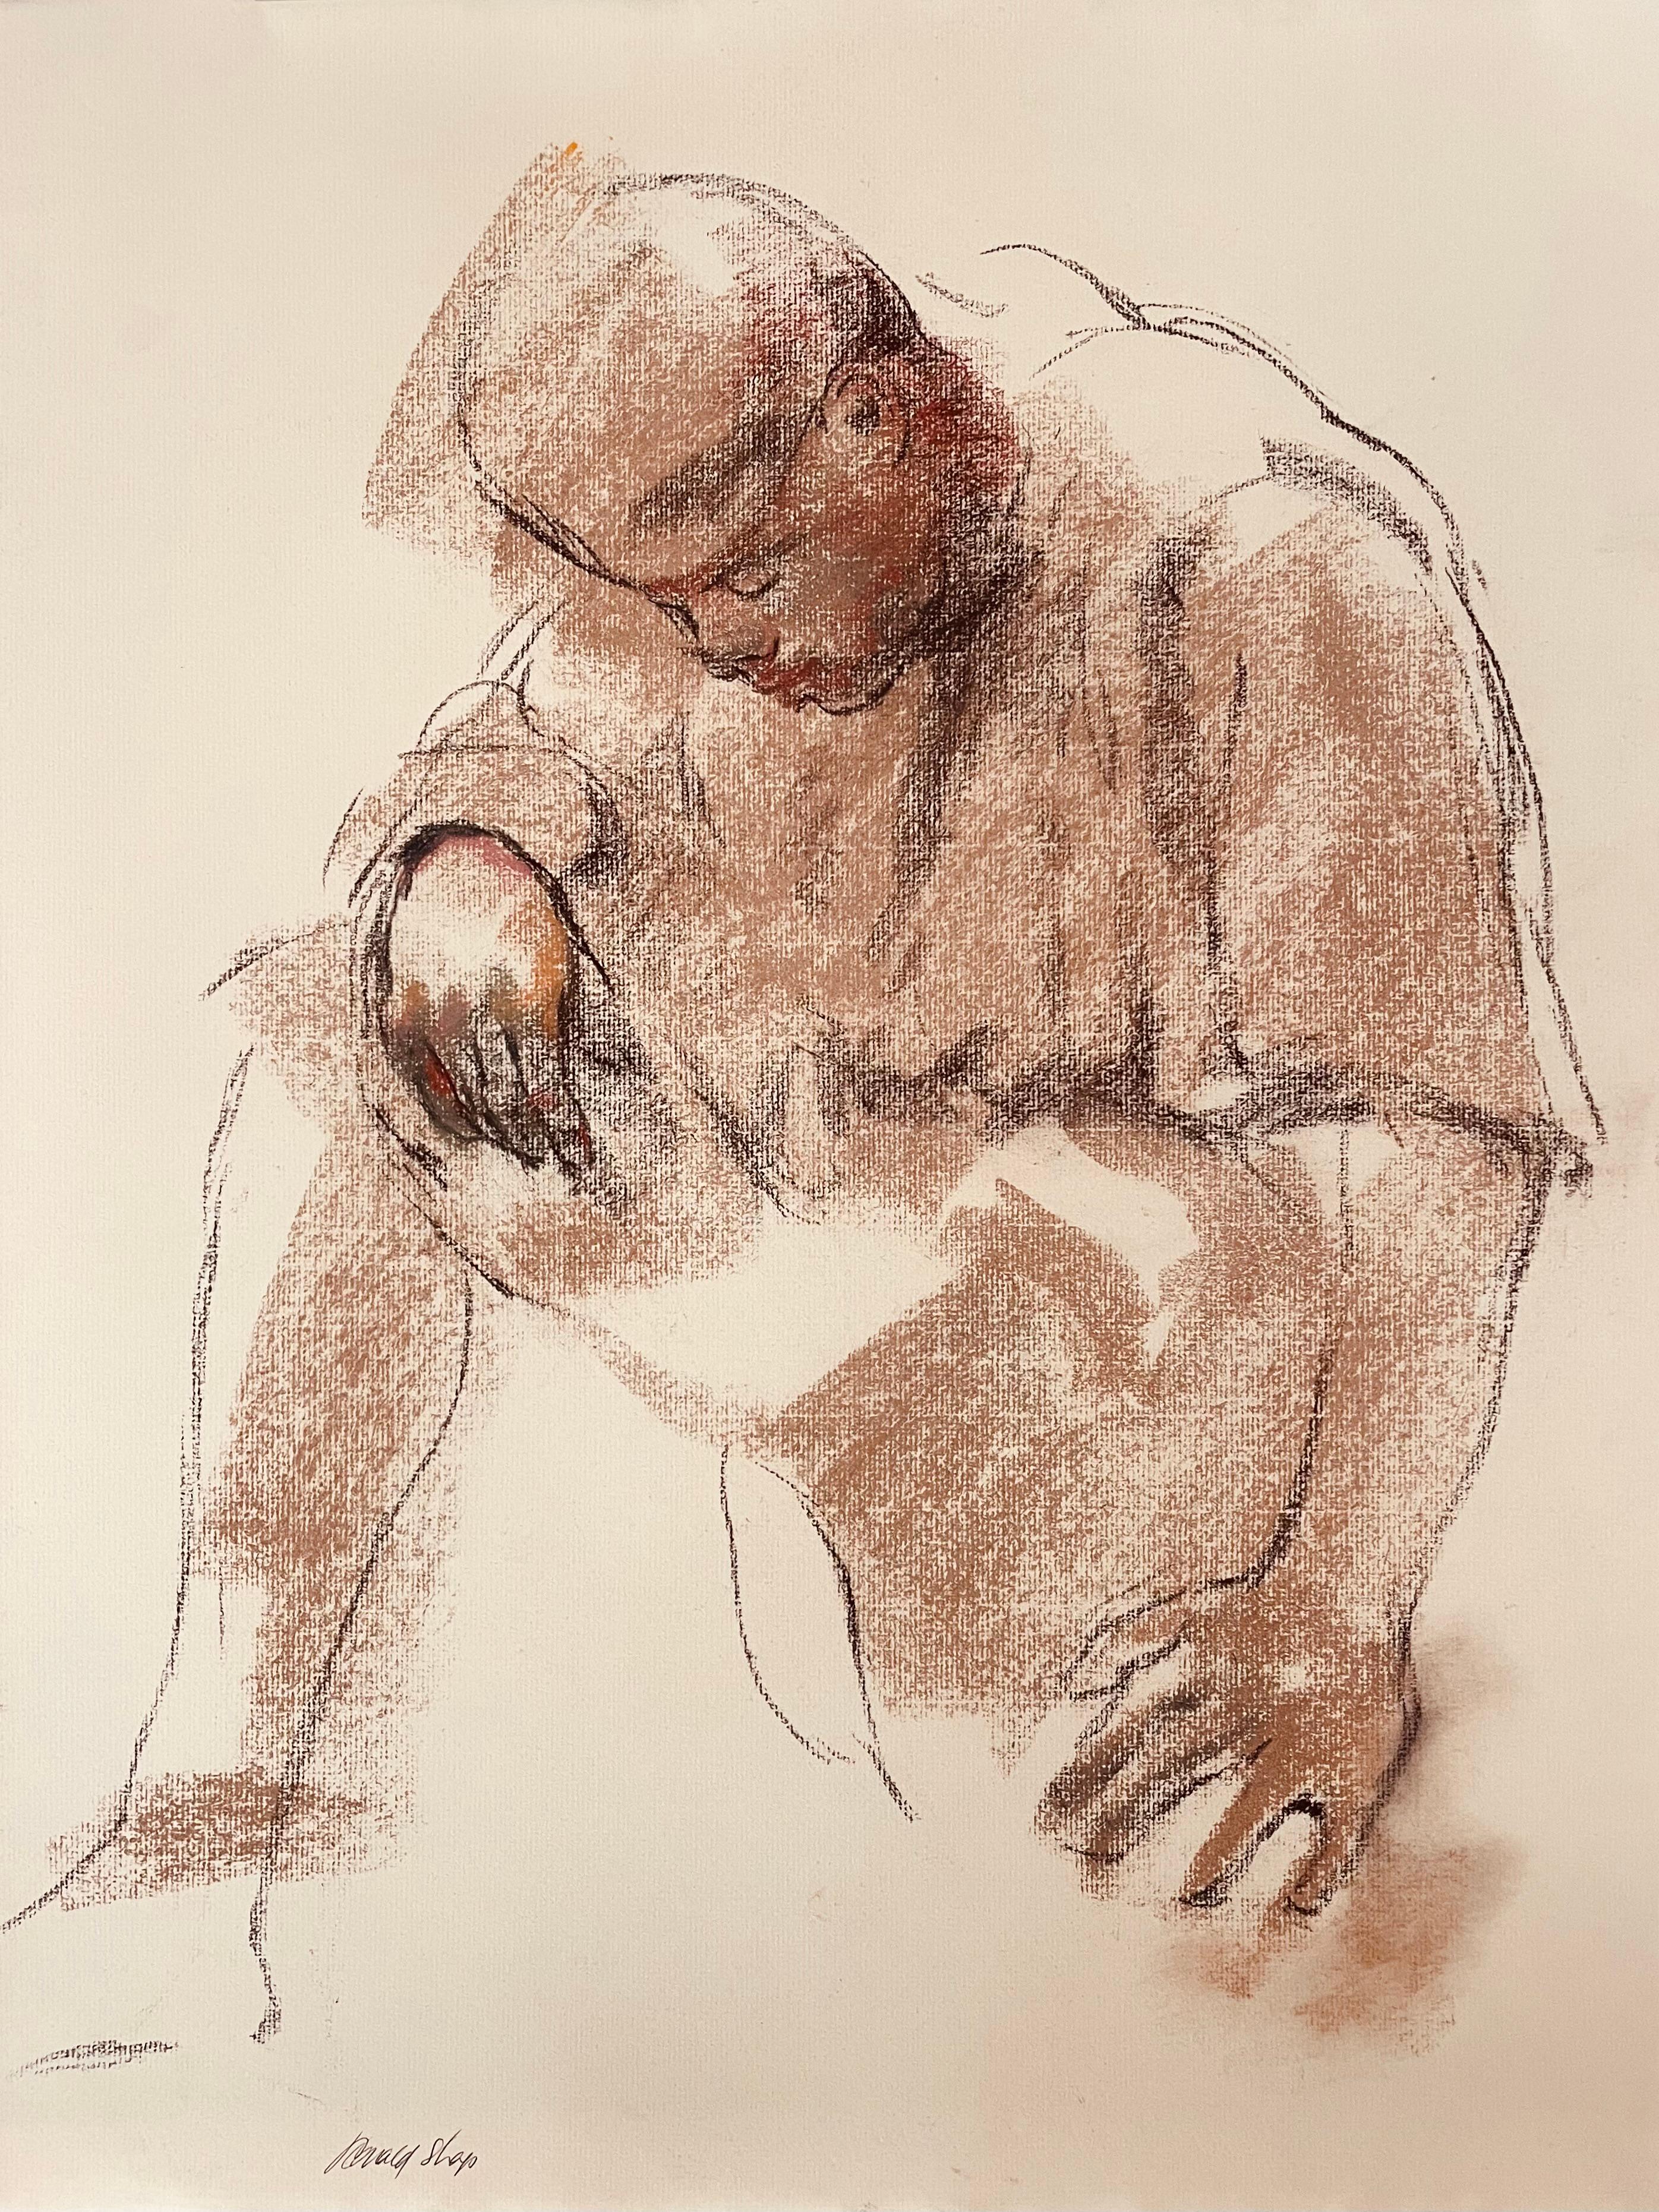 Original oil pastel and gouache figure drawing by celebrated, twentieth-century California landscape painter, Ronald Shap. Evocative sketch of a kneeling man in brown oil pastels. 25x19 inches. Signed. 

Ronald Shap was born in Toledo, OH and lived